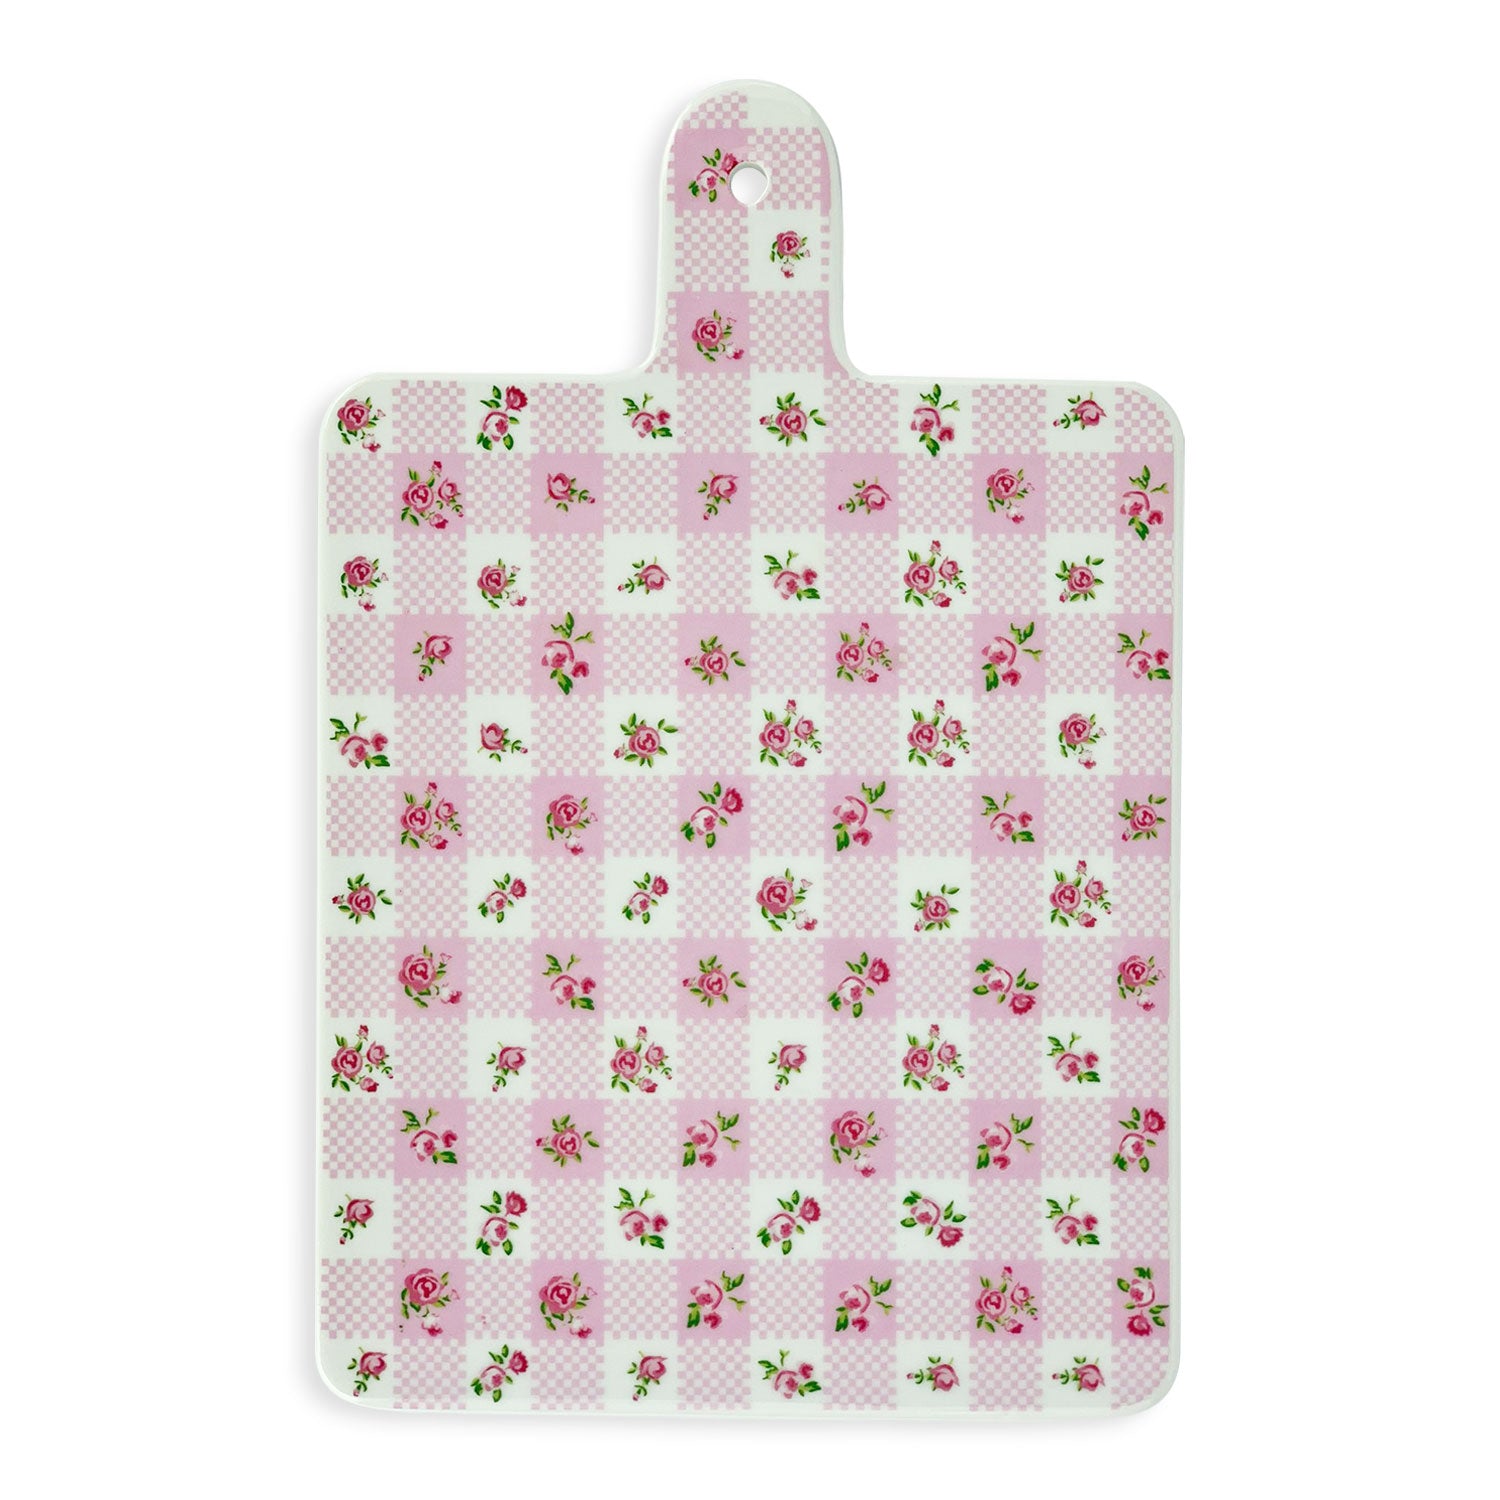 Tagliere in porcellana Isabelle Rose piatto per cucina Shabby chic Holly 5168